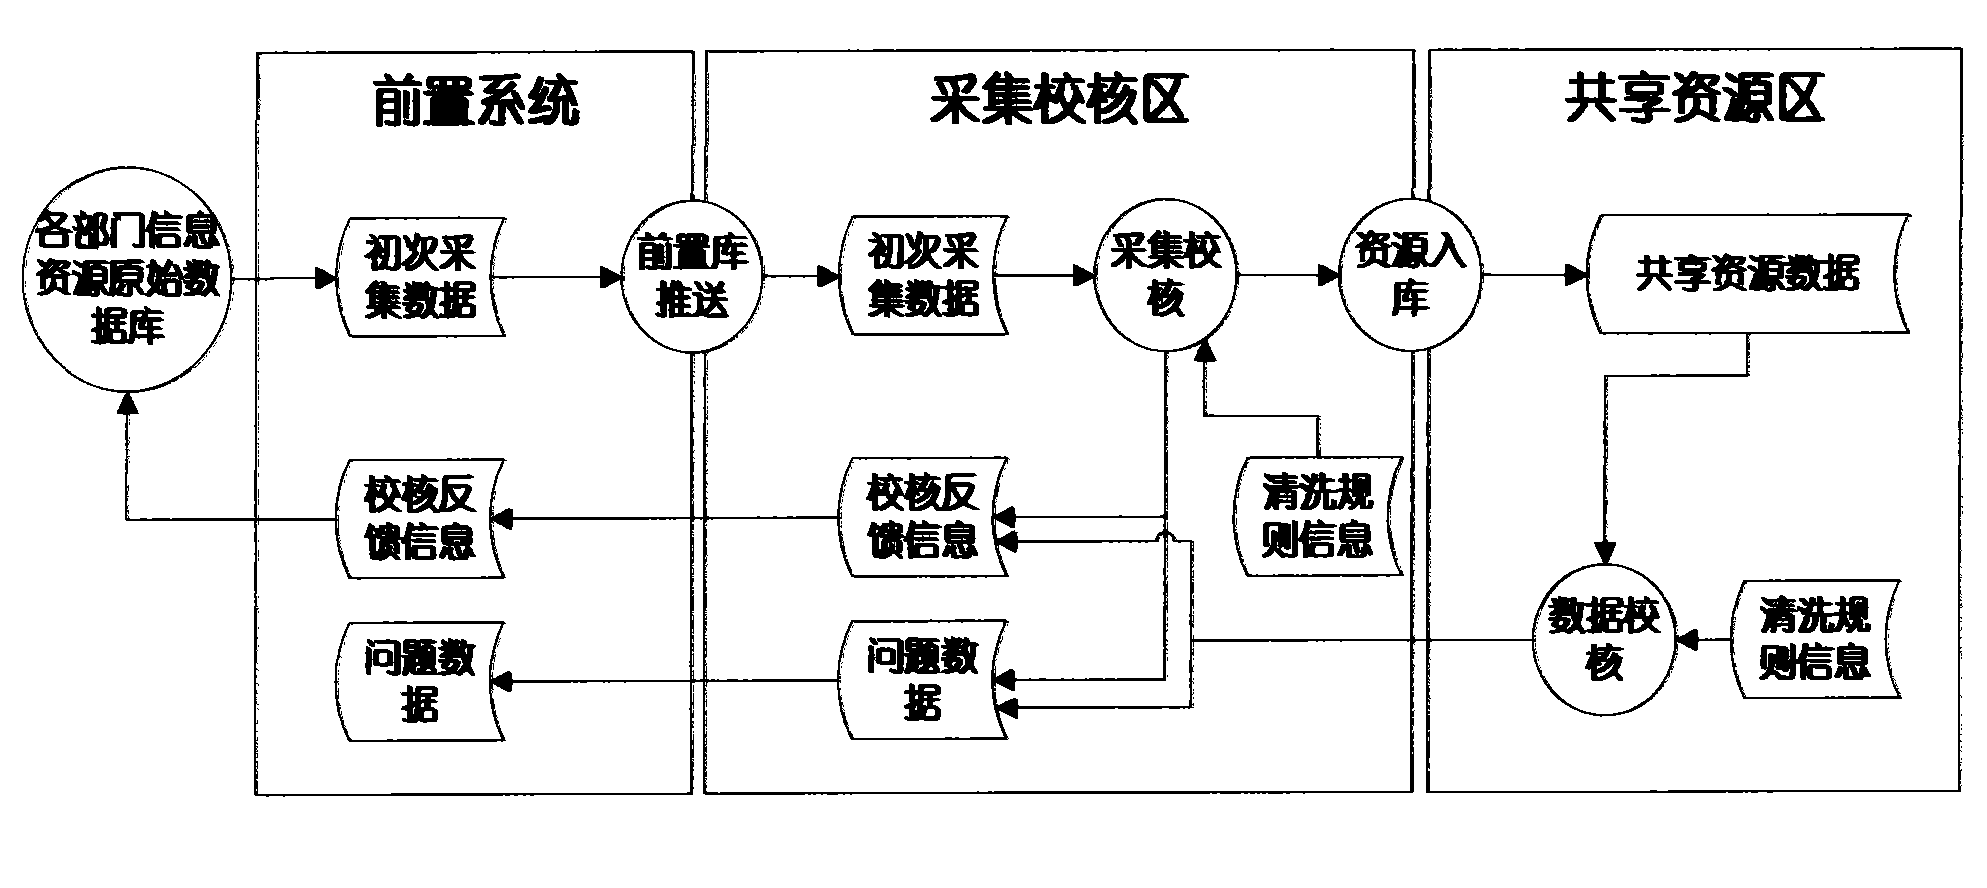 Method for integrating information resources of system of politics and law